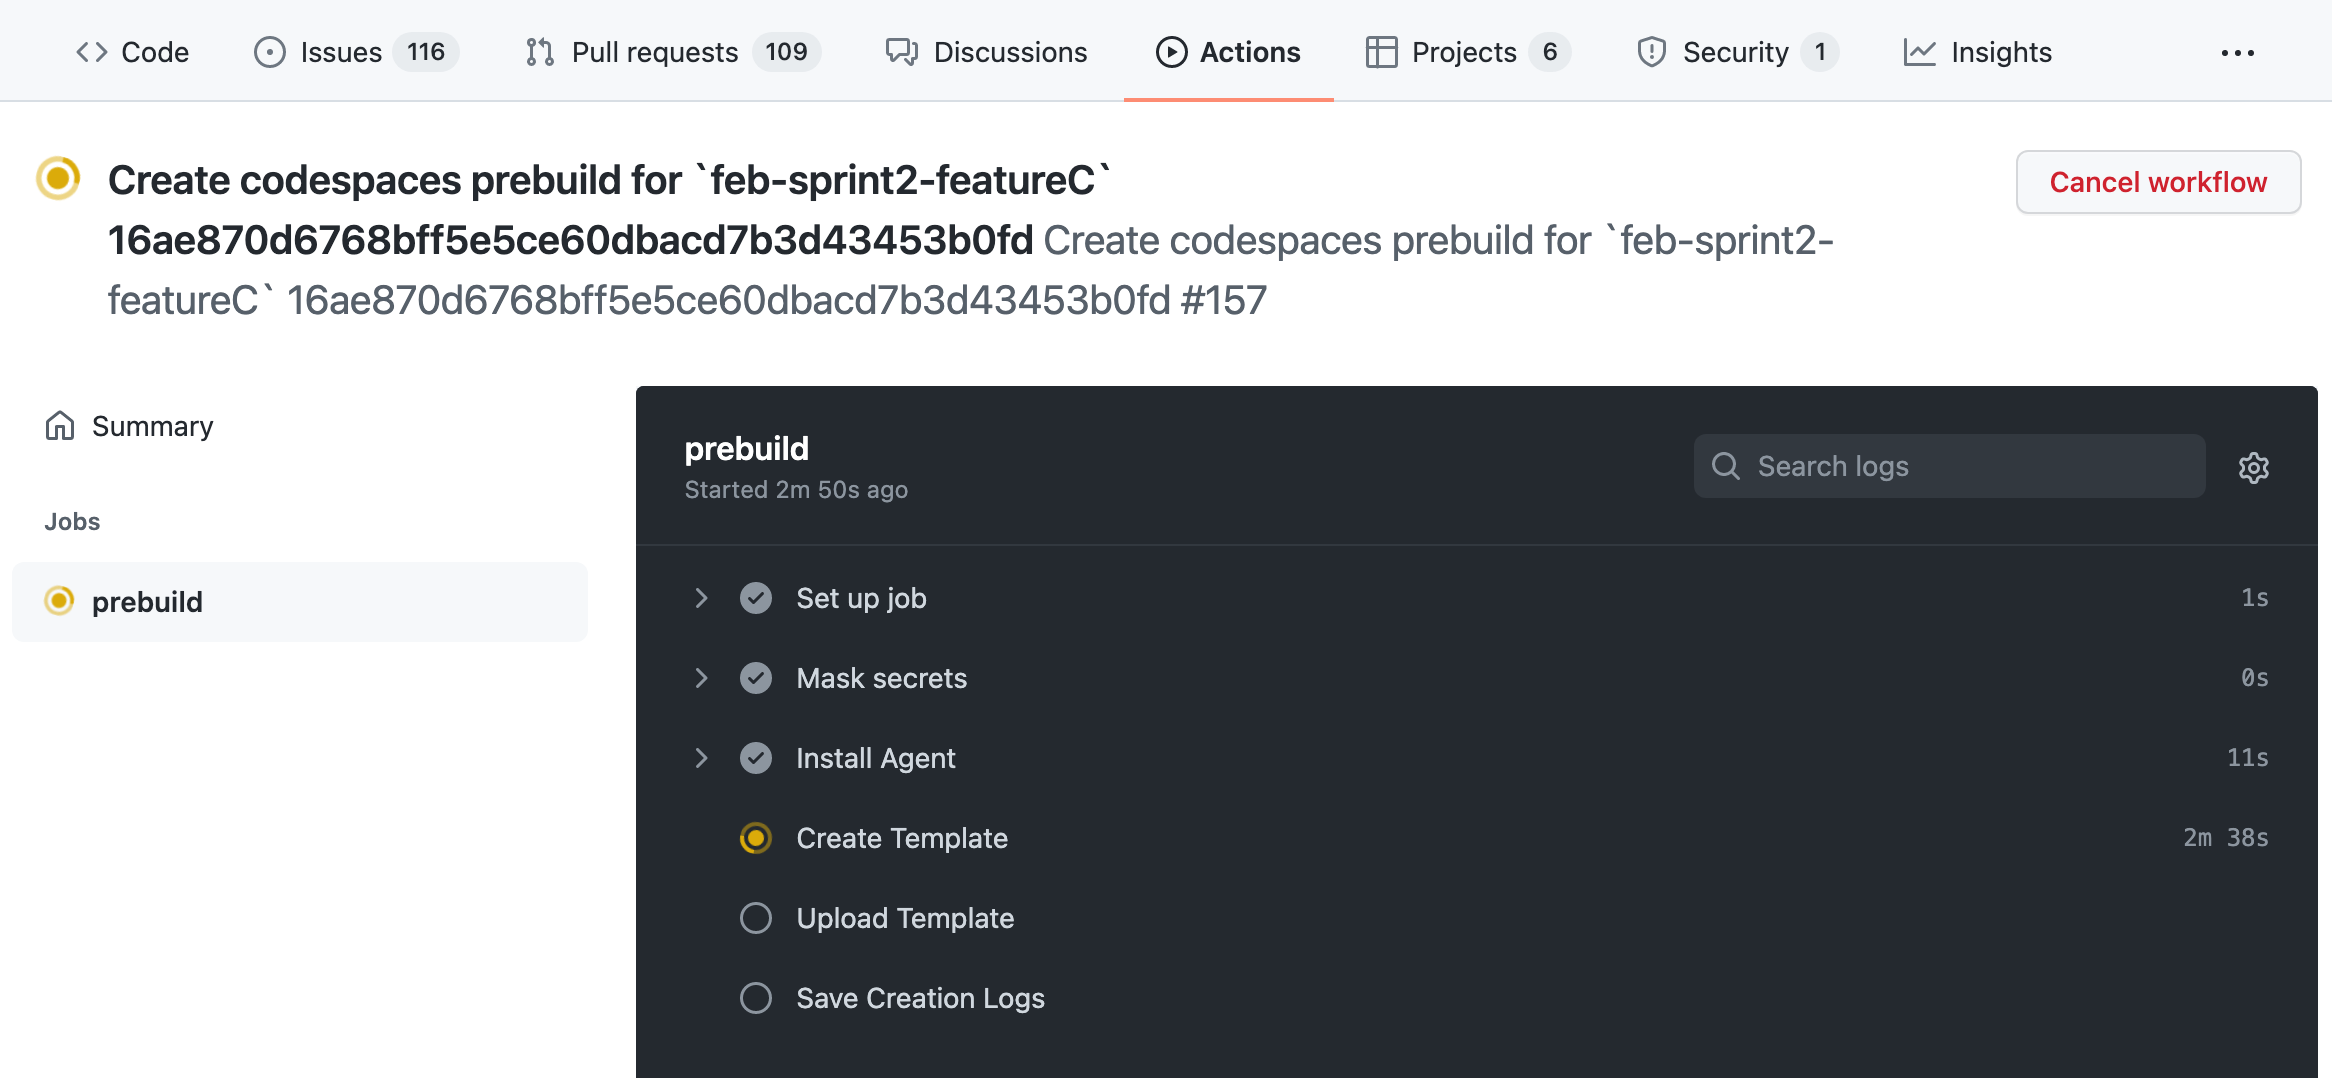 Screenshot of the prebuild workflow output in the "Actions" tab of GitHub.com.